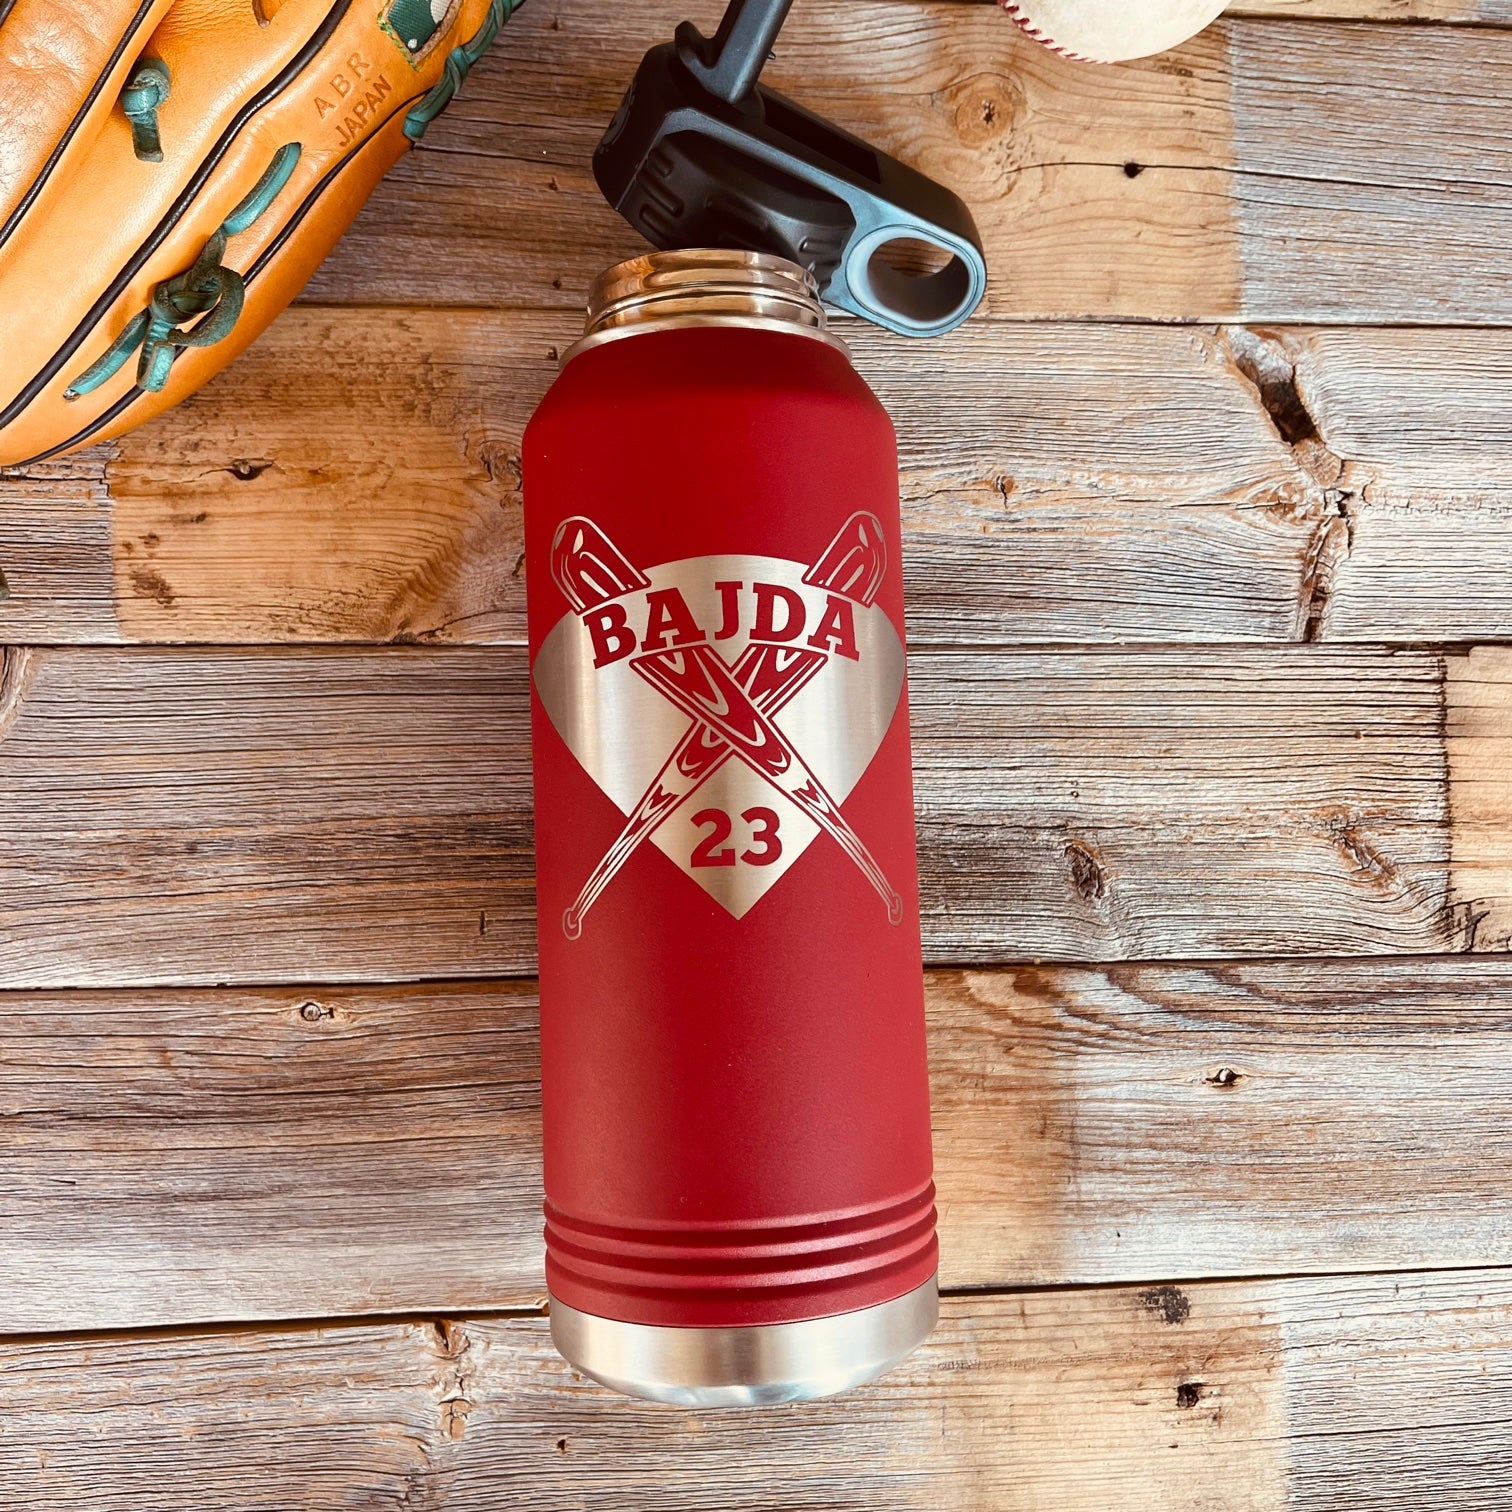  Hyturtle Personalized Baseball Water Bottle Baseball Players  Design Sports Bottles 12oz 18oz 32oz Insulated Stainless Steel Travel Cup  Christmas Gifts For Men Boys Friends Dad Sports Fan : Sports & Outdoors